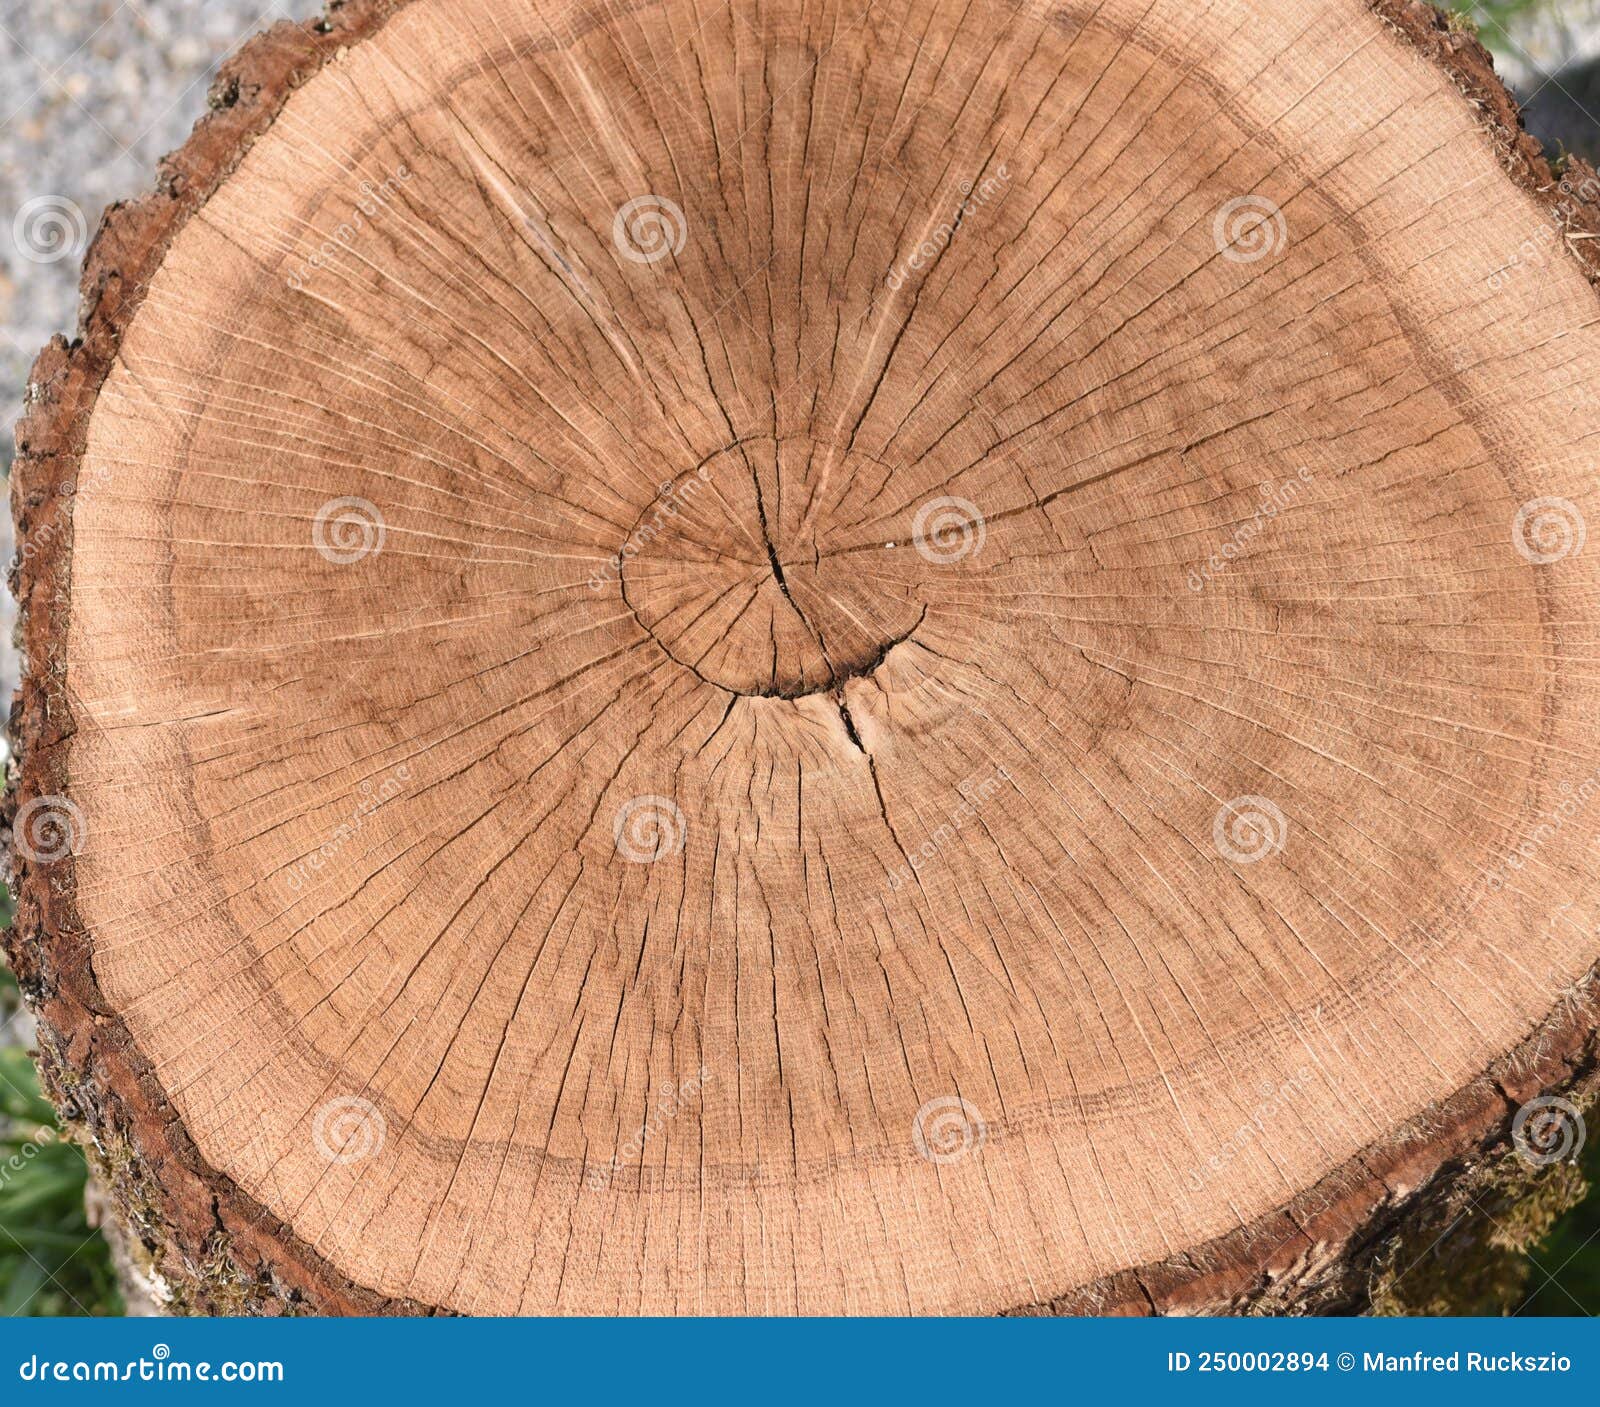 Country Scientist — How to Study Tree Rings - Make: